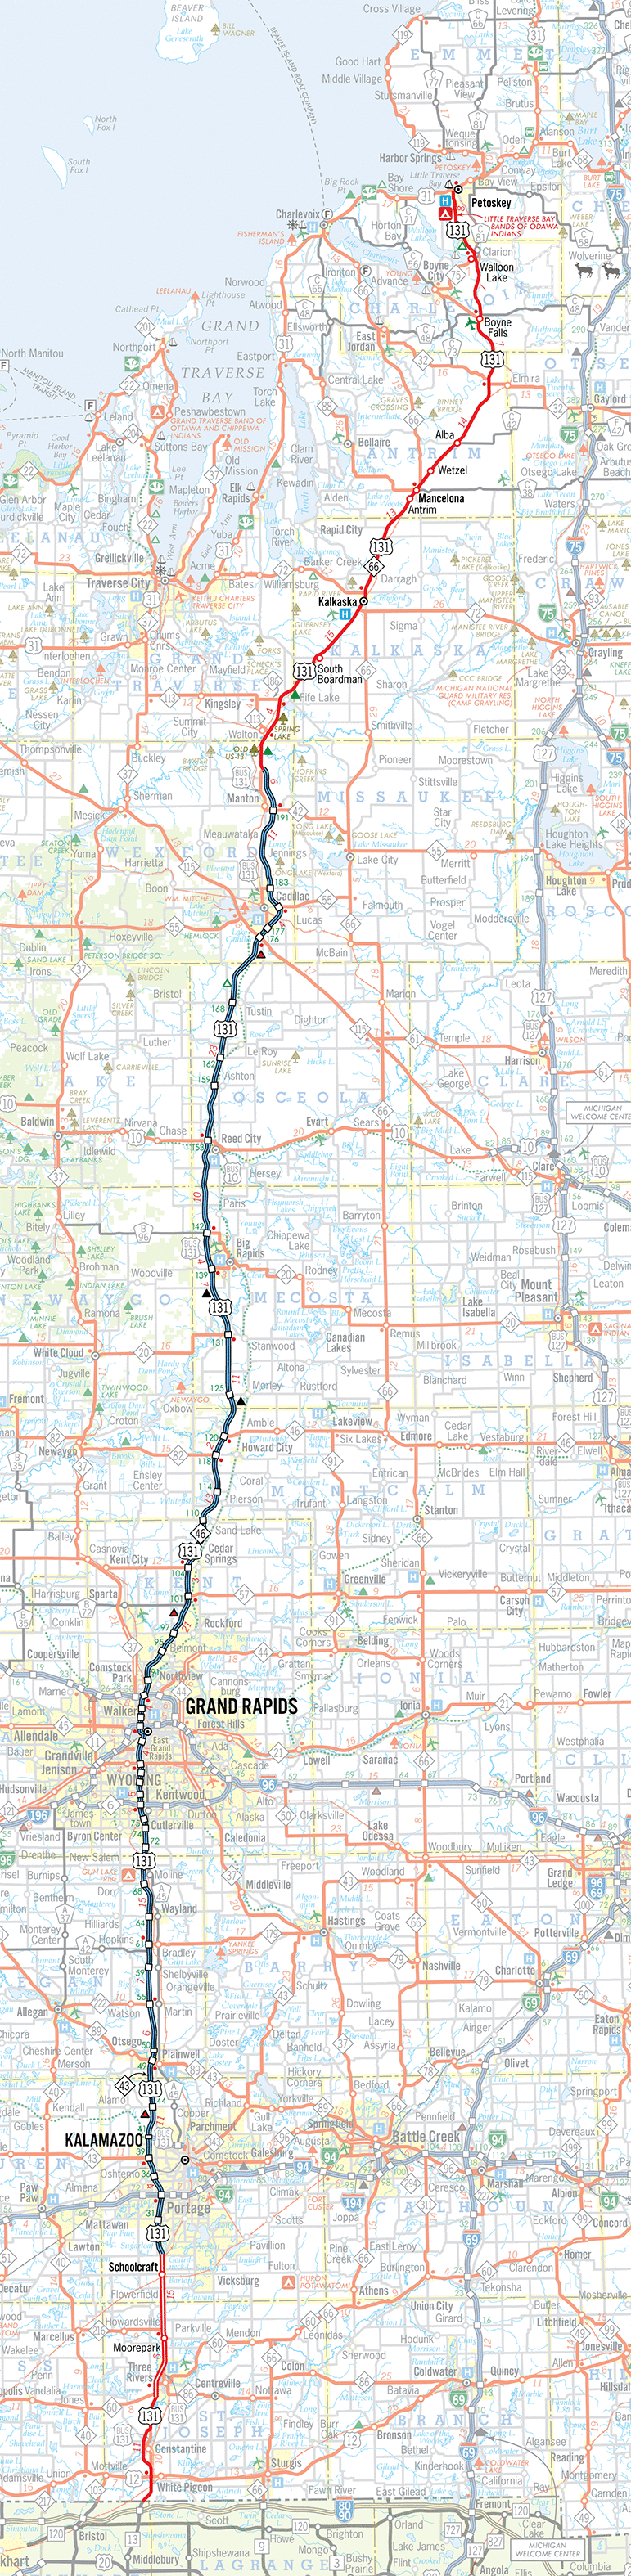 US-131 Route Map